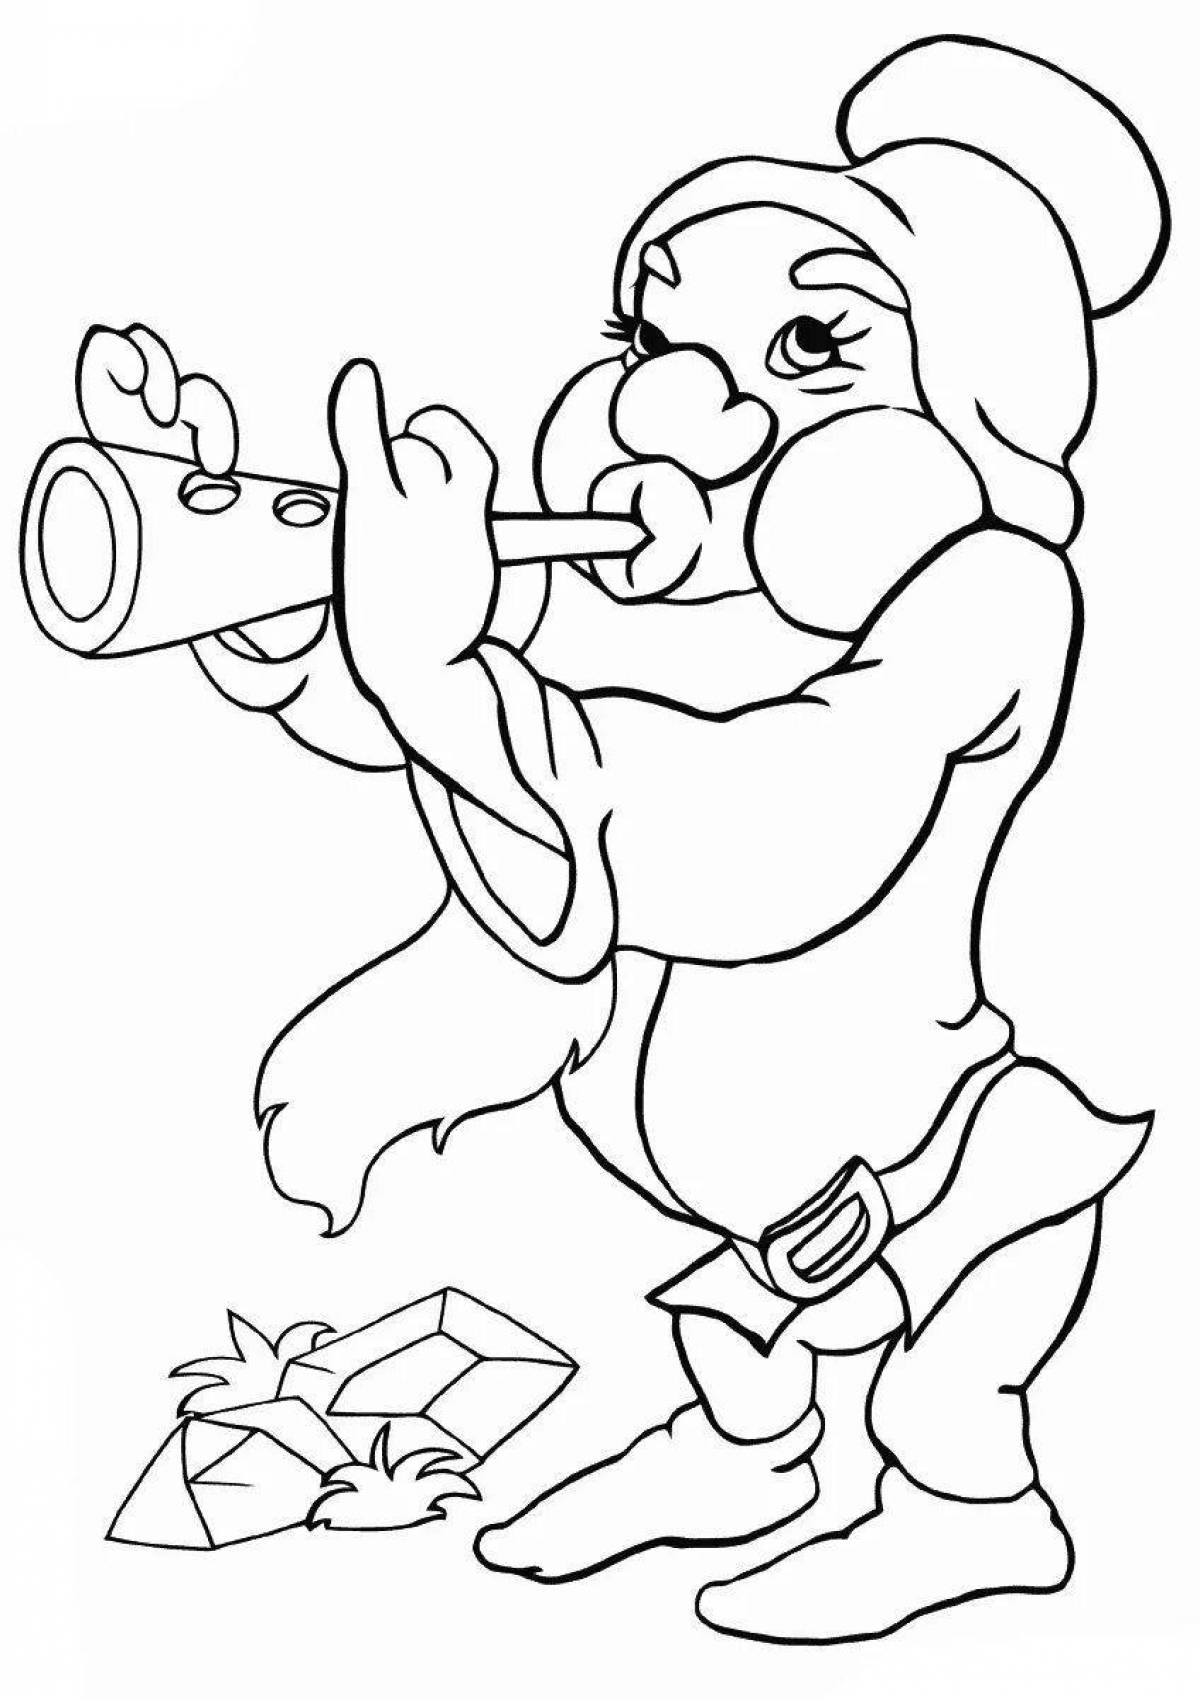 Playful flute and jug coloring page